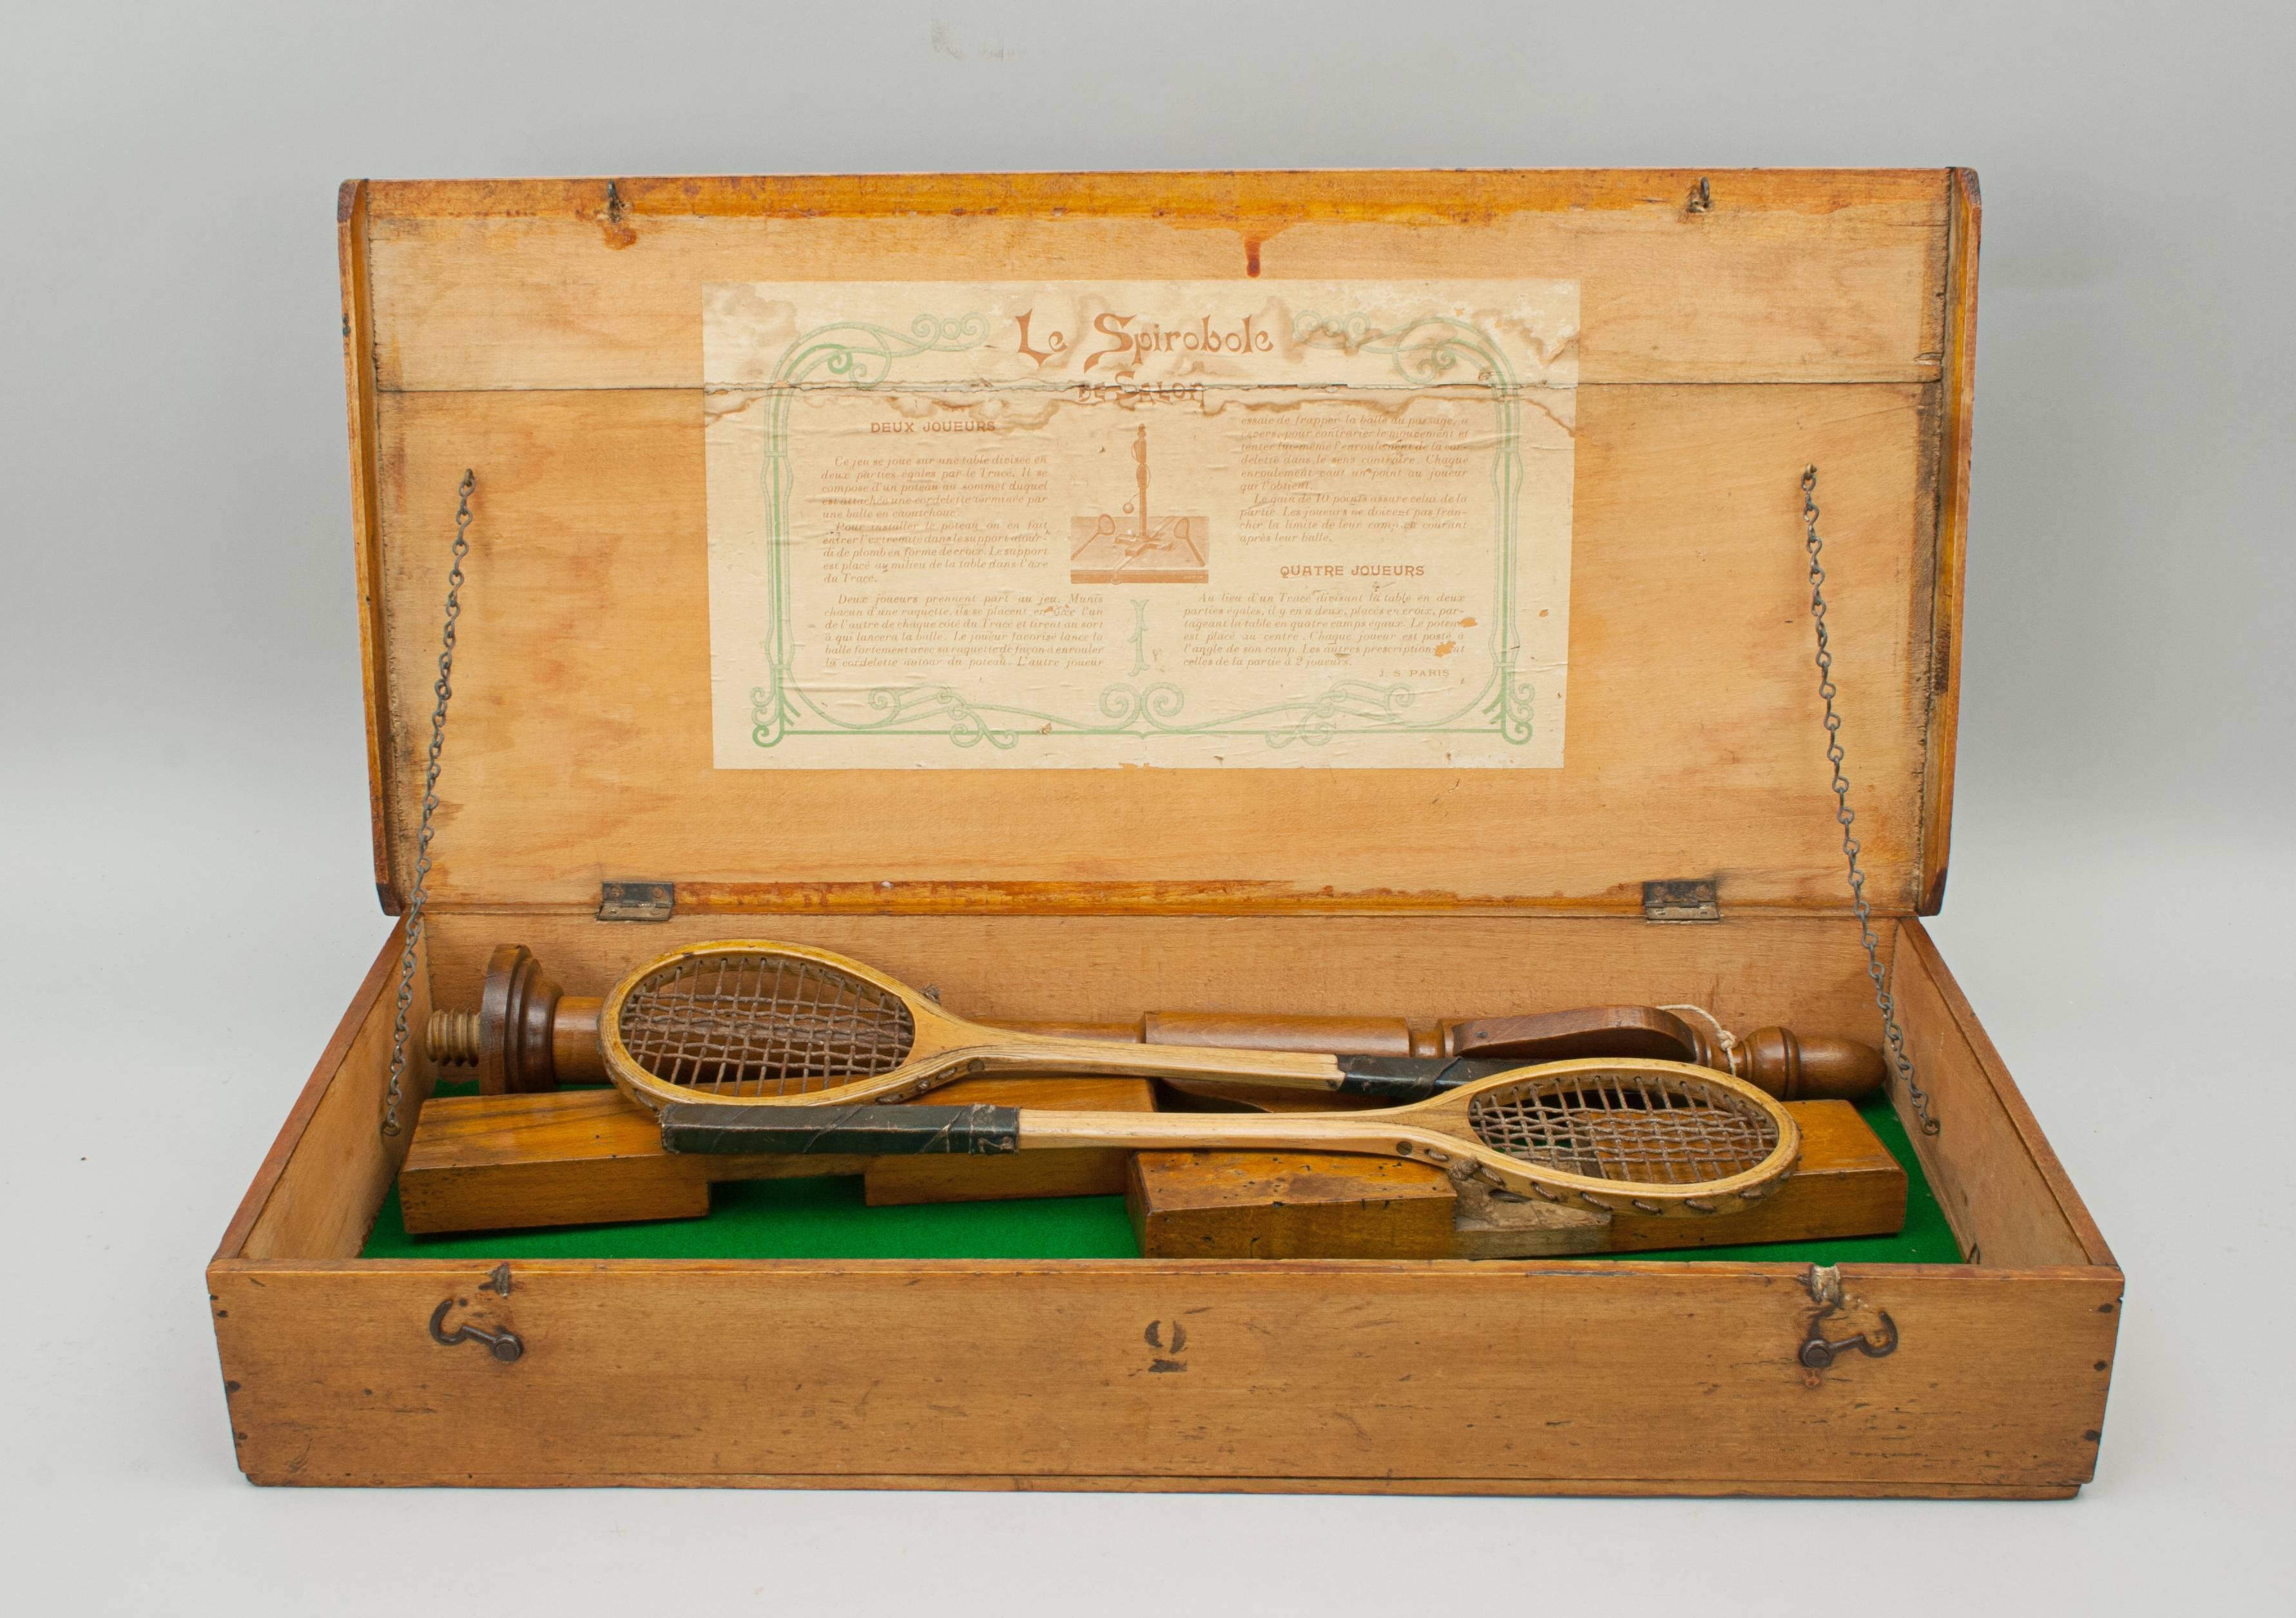 Early 20th Century Antique Le Spiroble De Salon, A French Tennis Game with Two Rackets For Sale